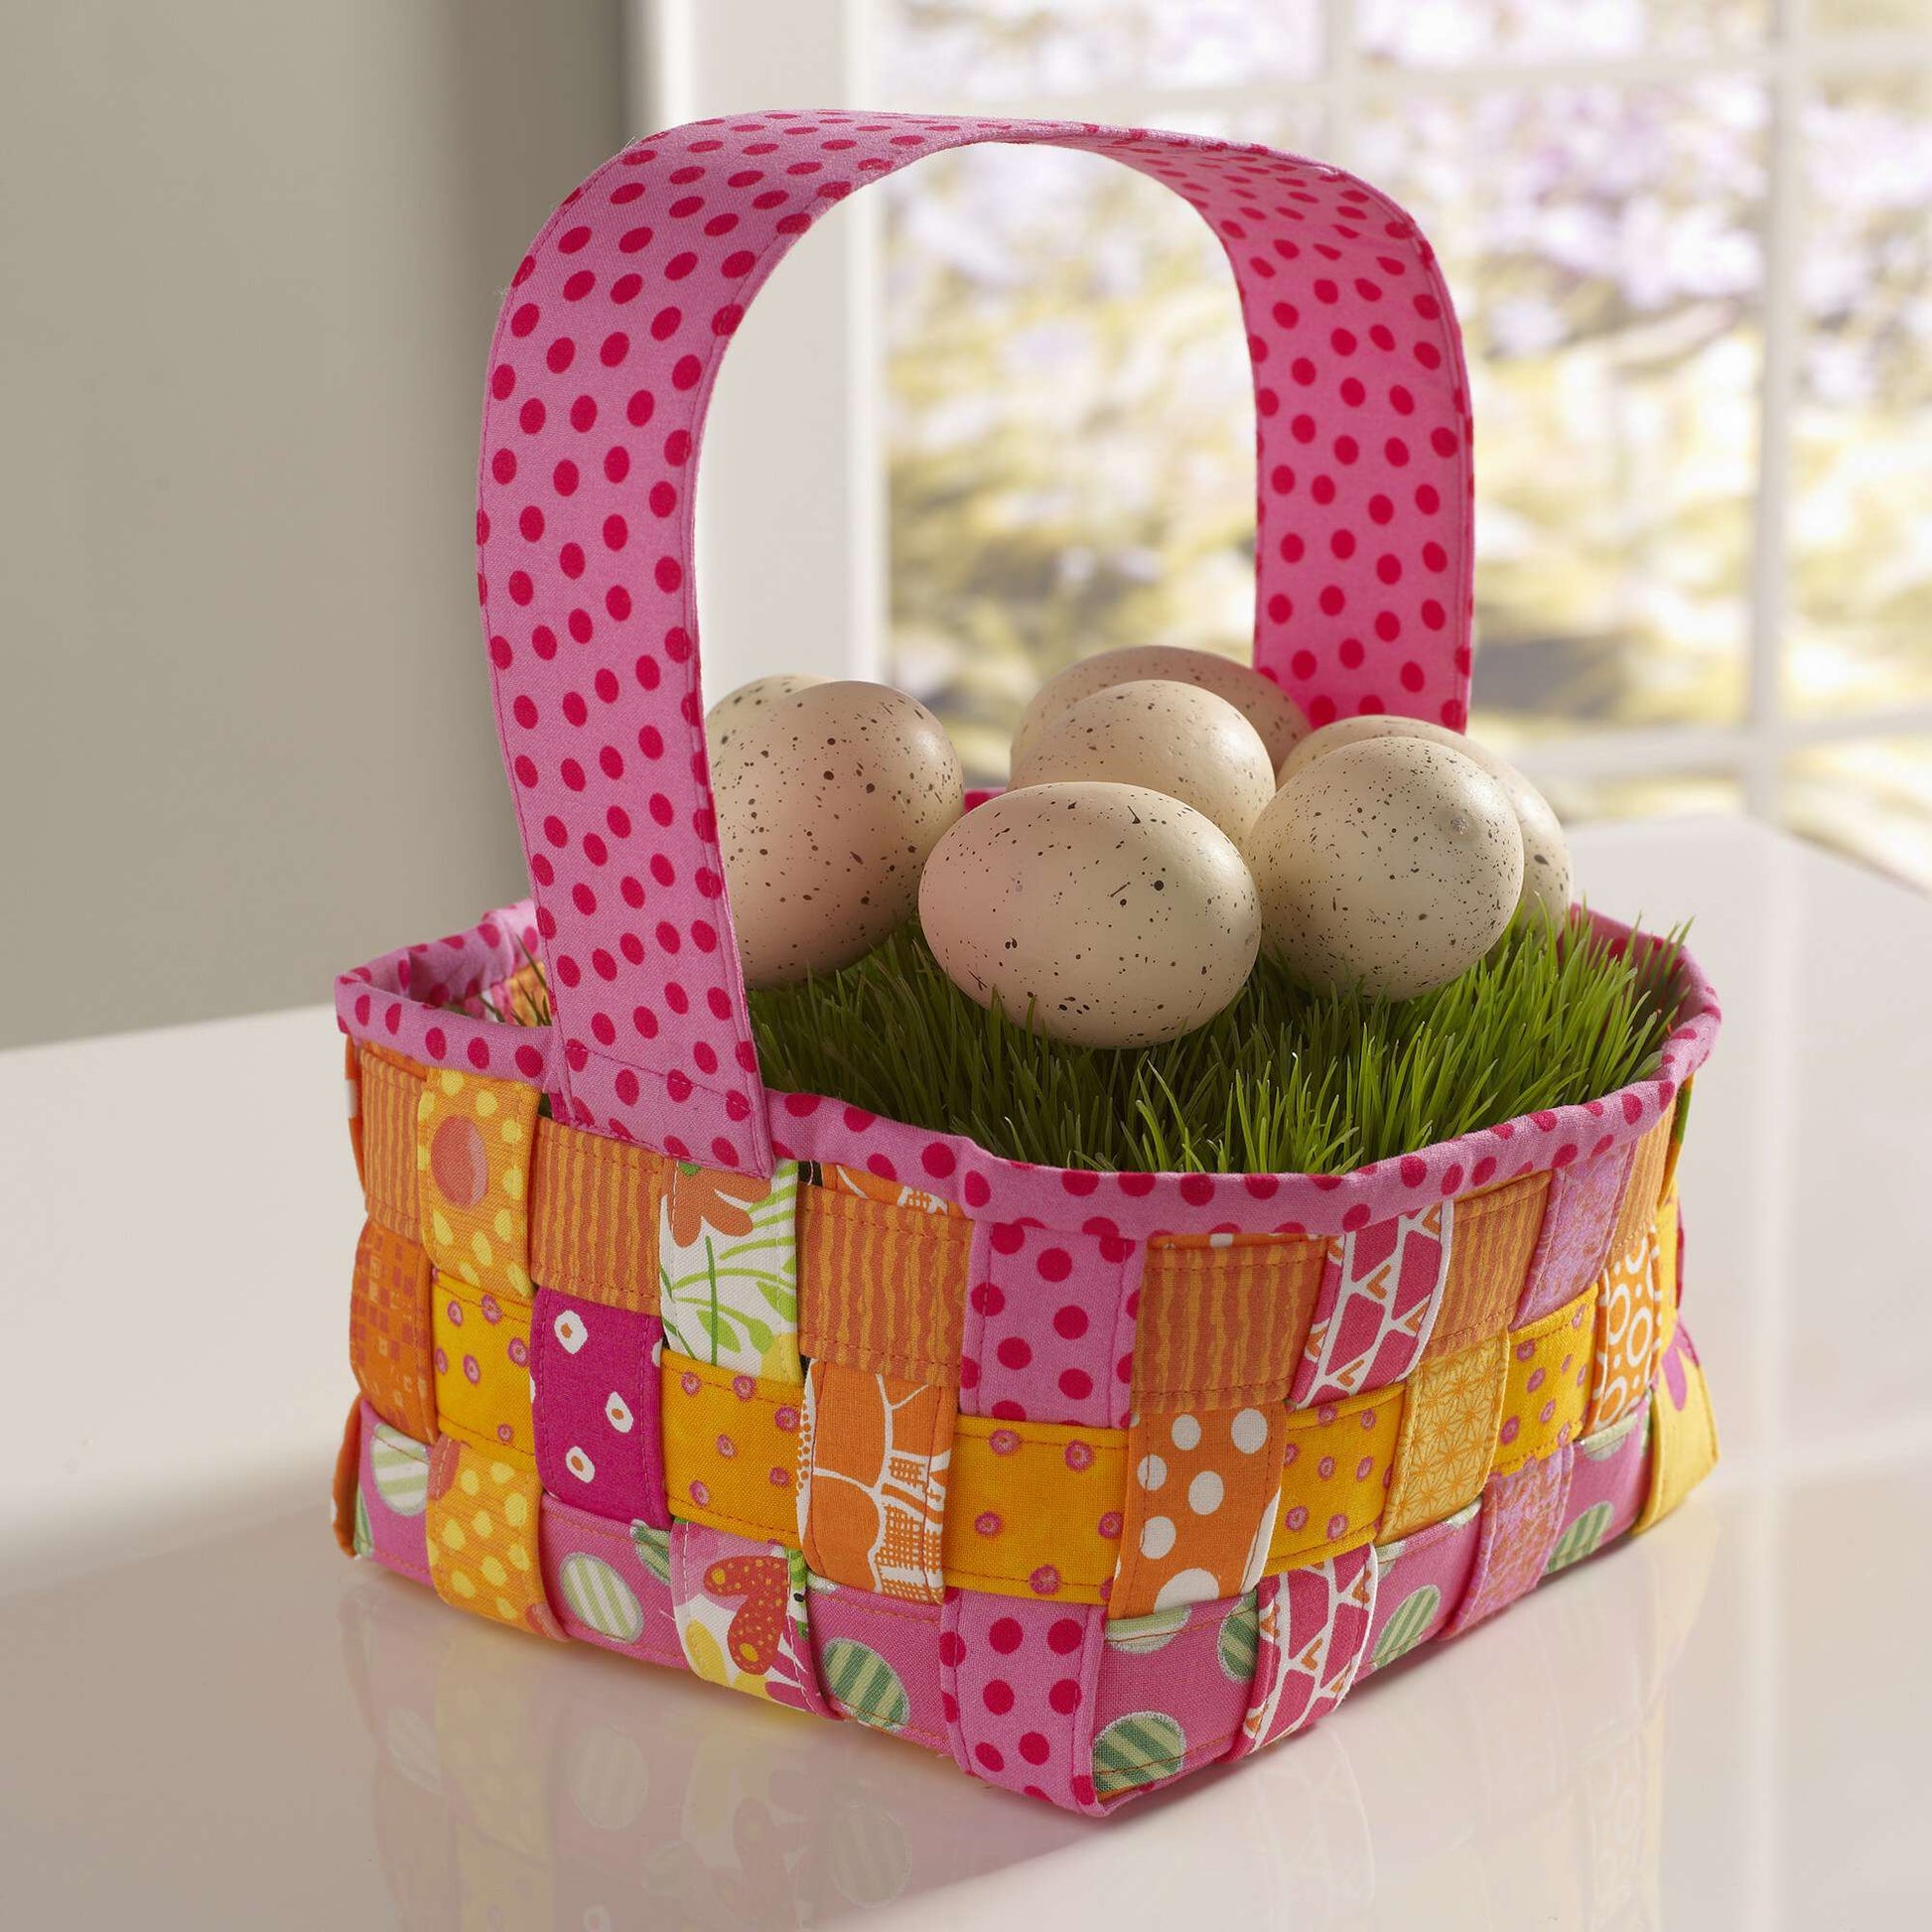 Free Coats & Clark Sewing Woven Easter Basket Pattern